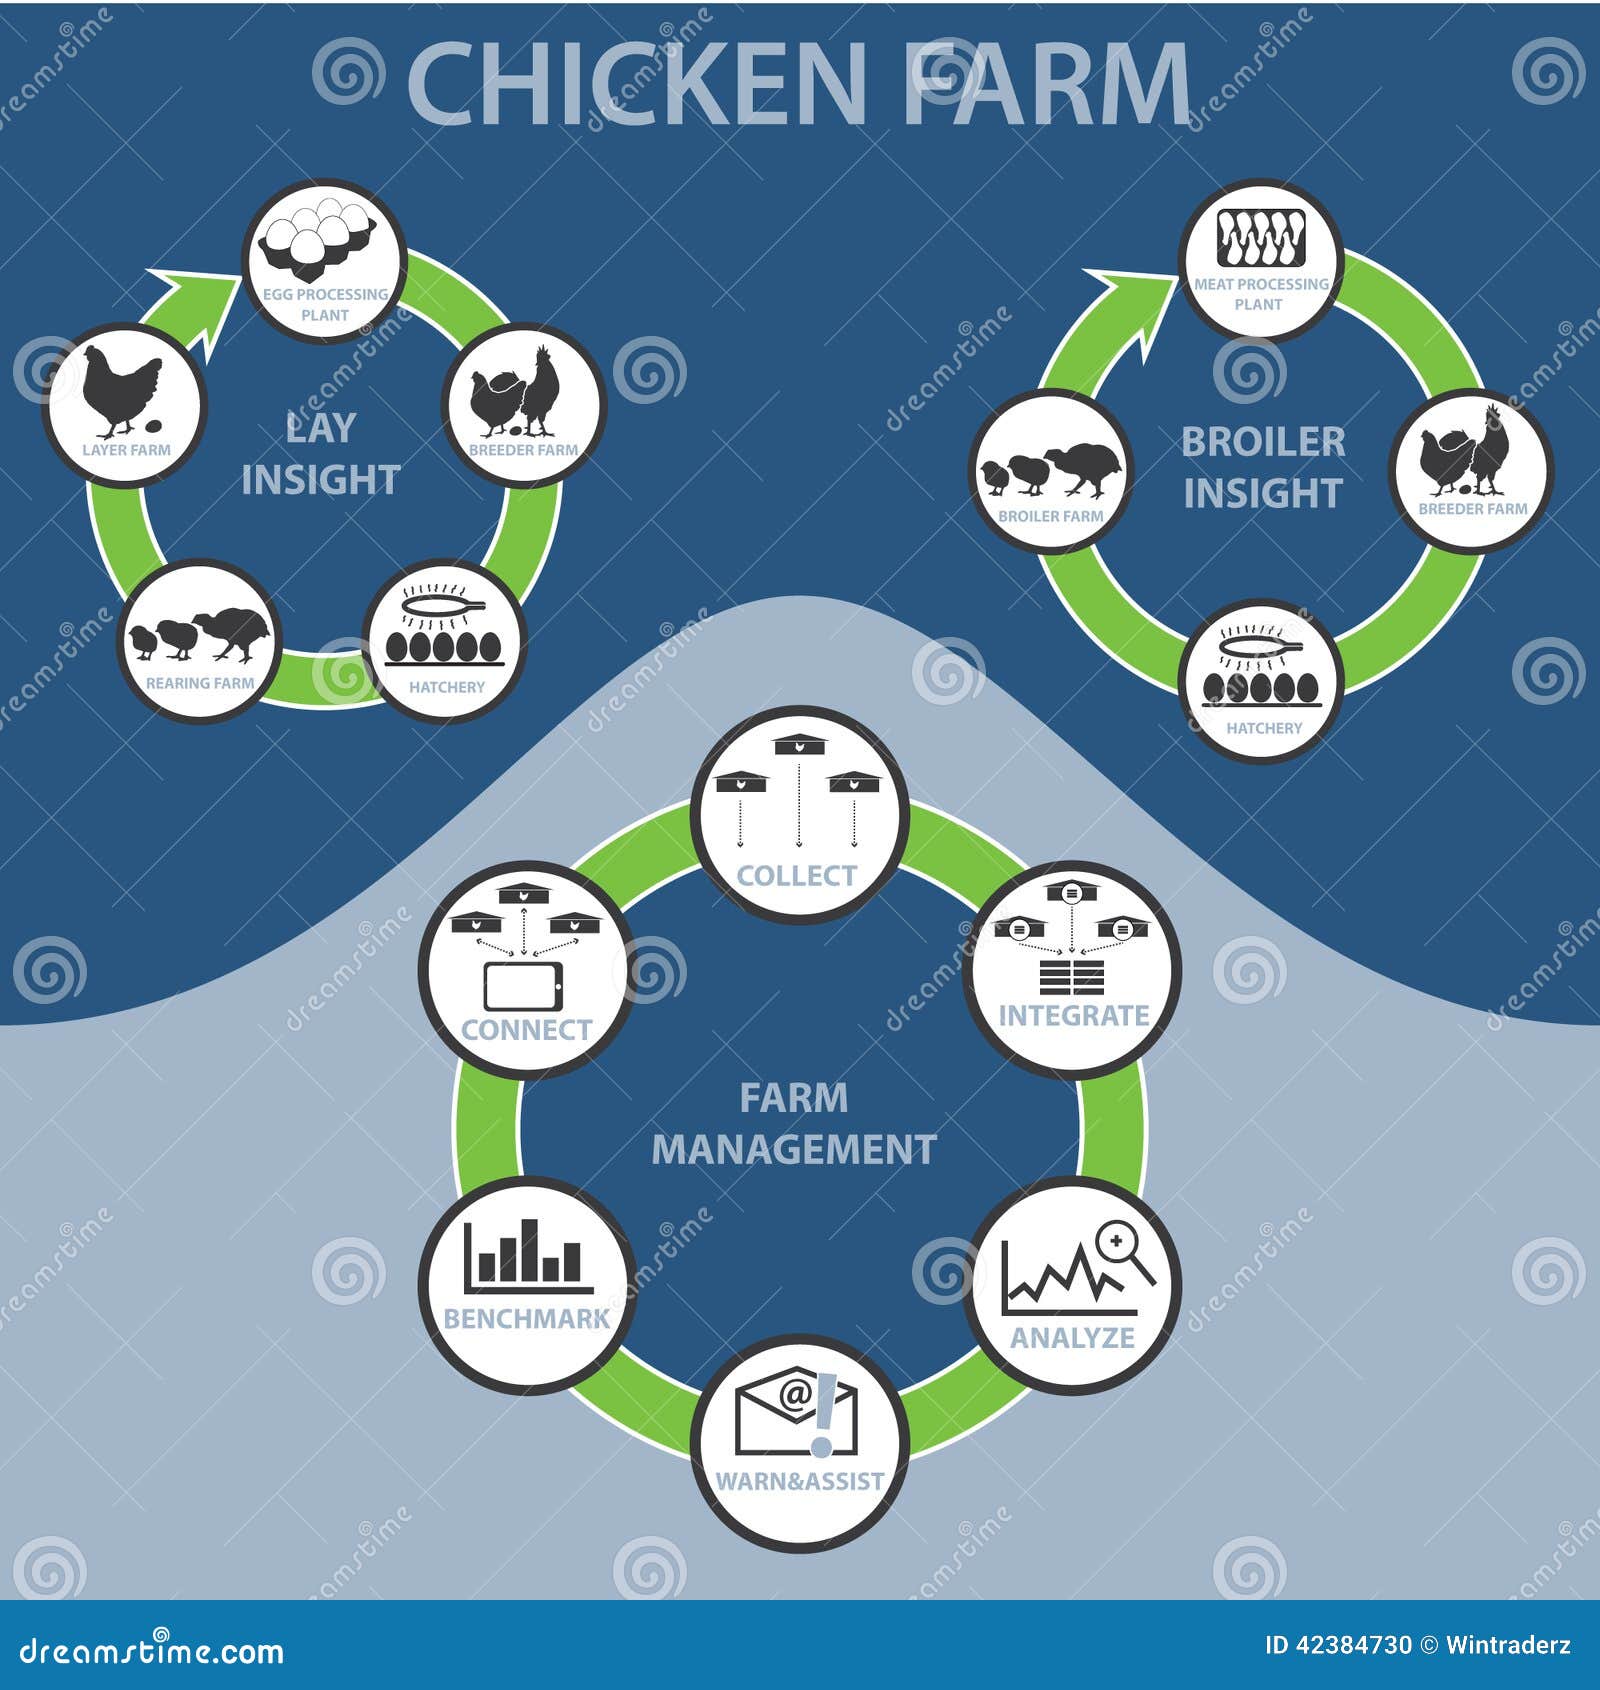  chicken meat production and egg production. Include farm management